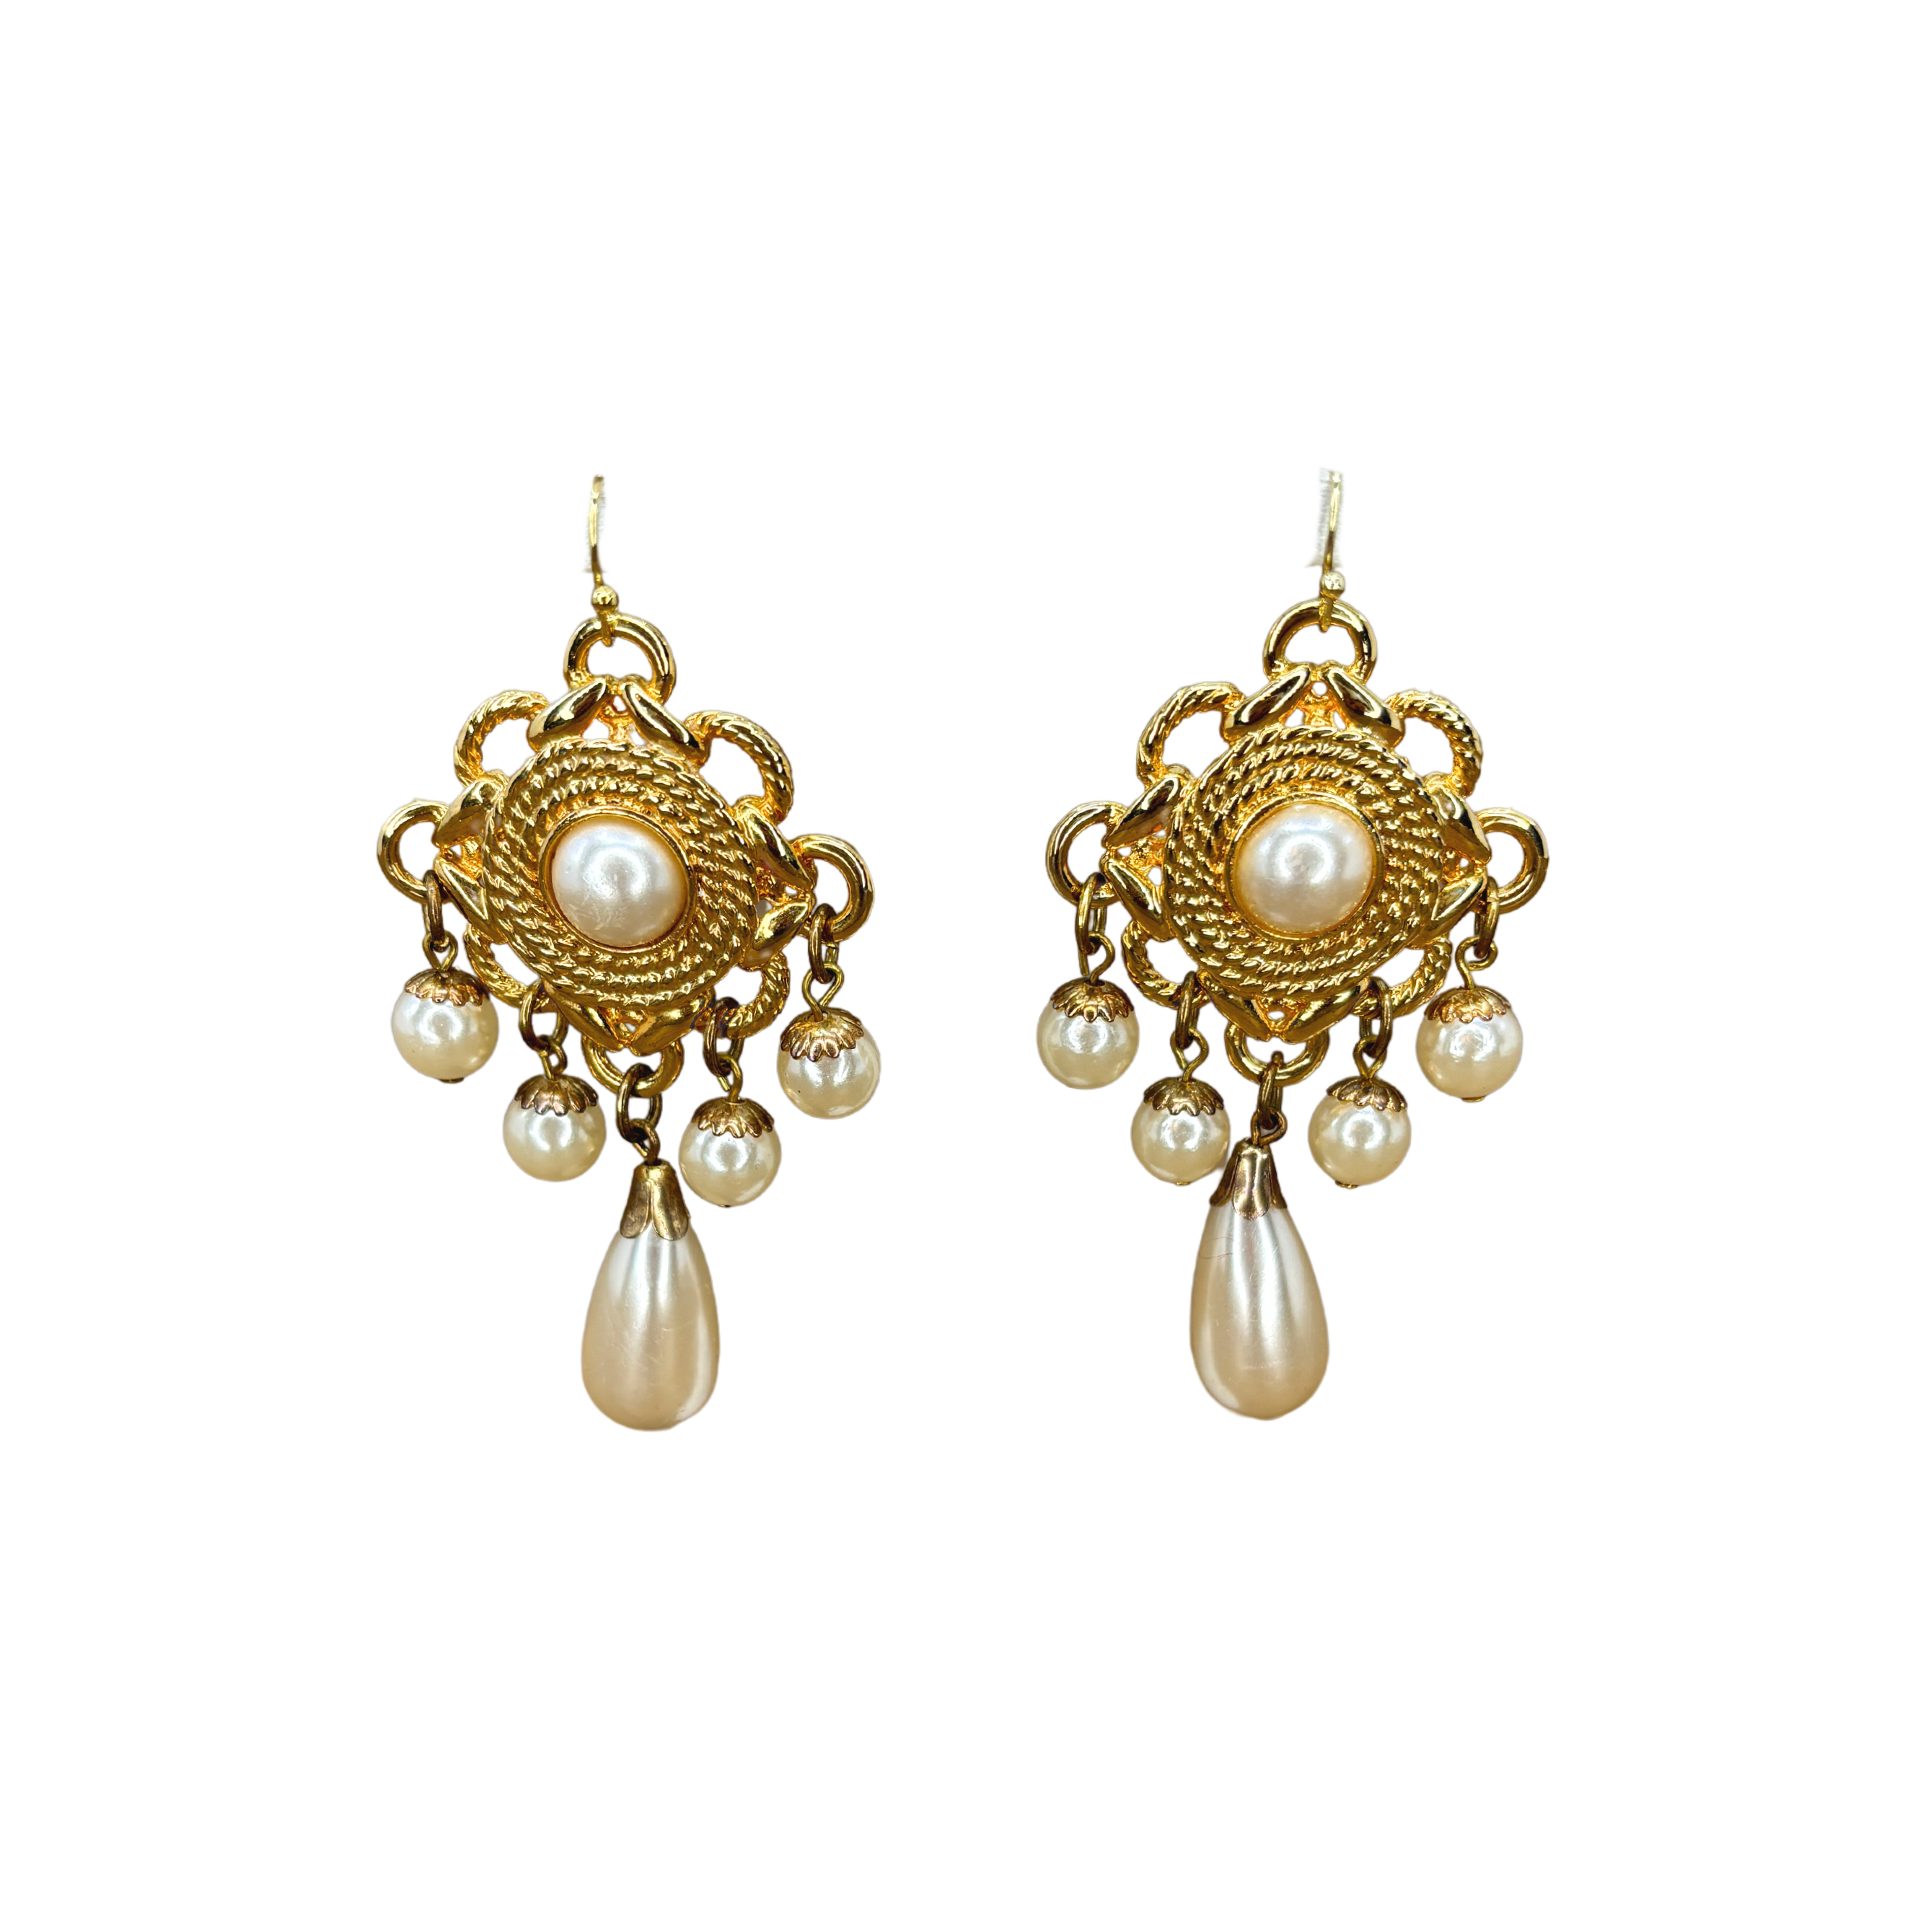 Gold-Plated Rope & Pearl Earrings